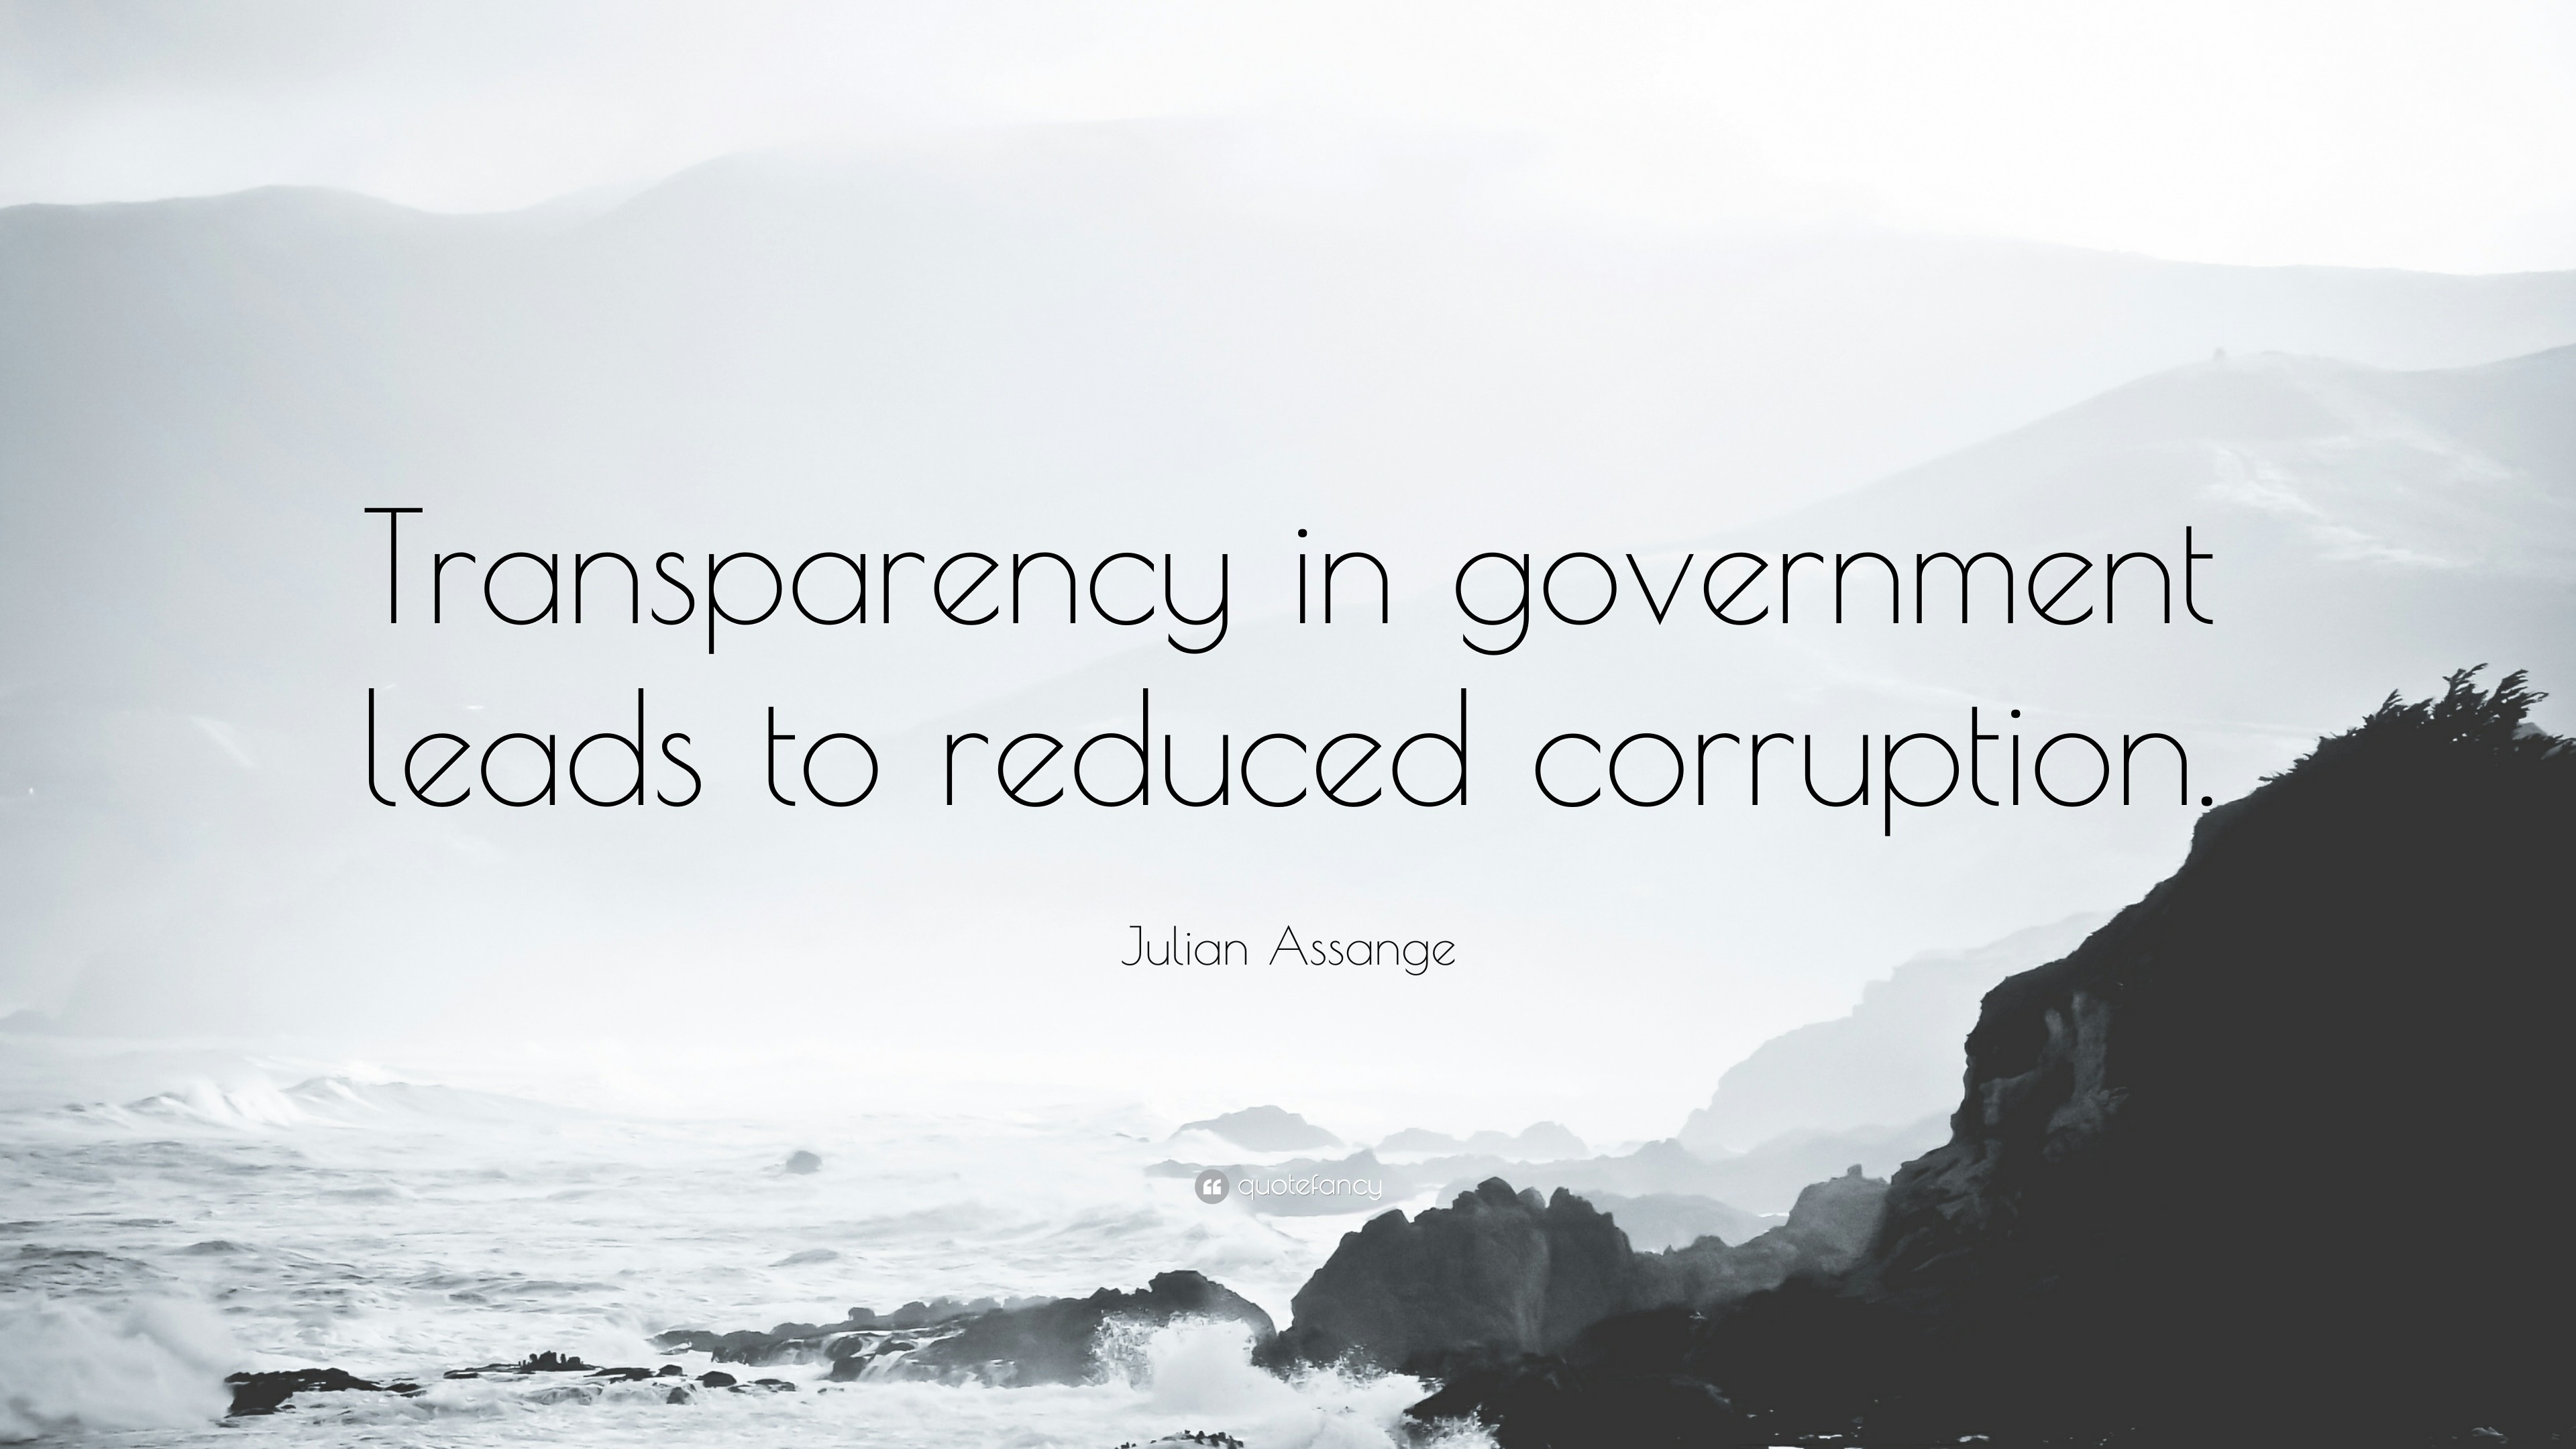 3840x2160 Julian Assange Quote: “Transparency in government leads to reduced  corruption.”